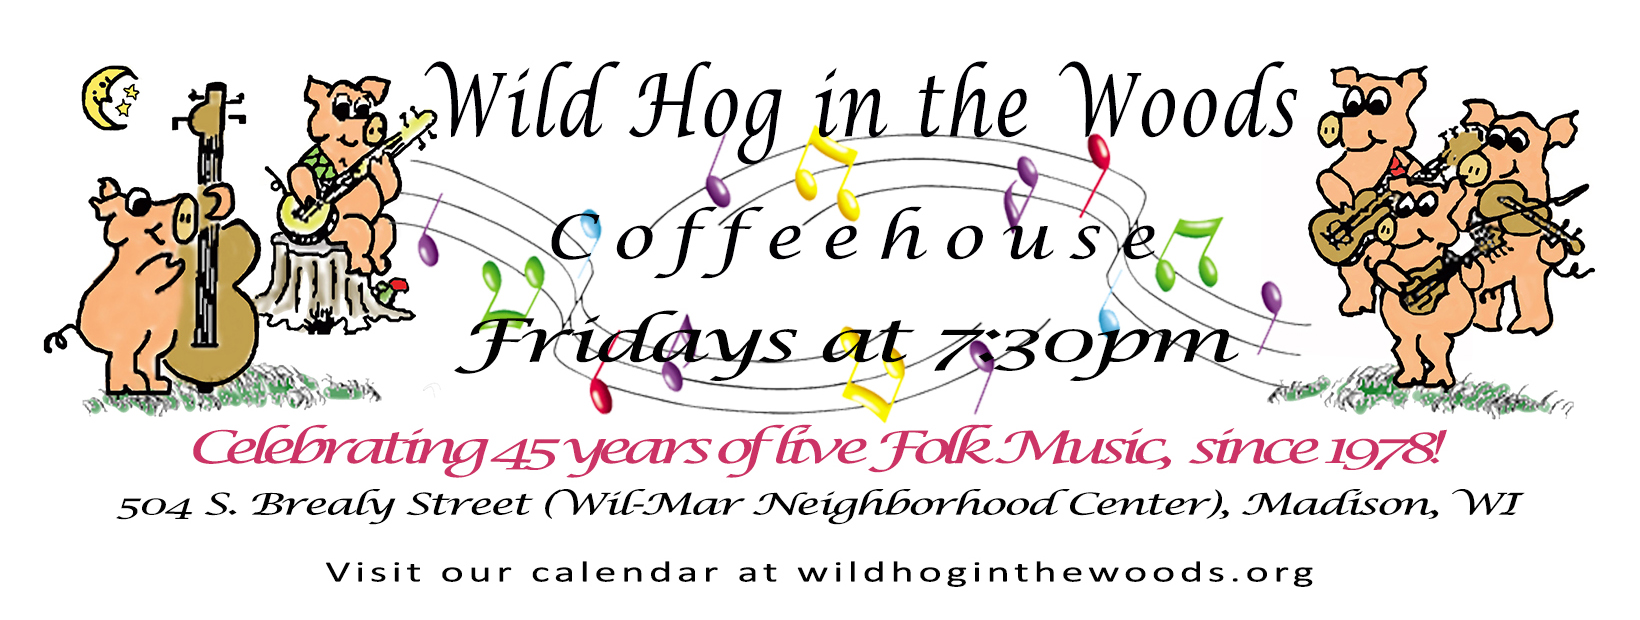 Welcome to the Wild Hog in the Woods Coffeehouse